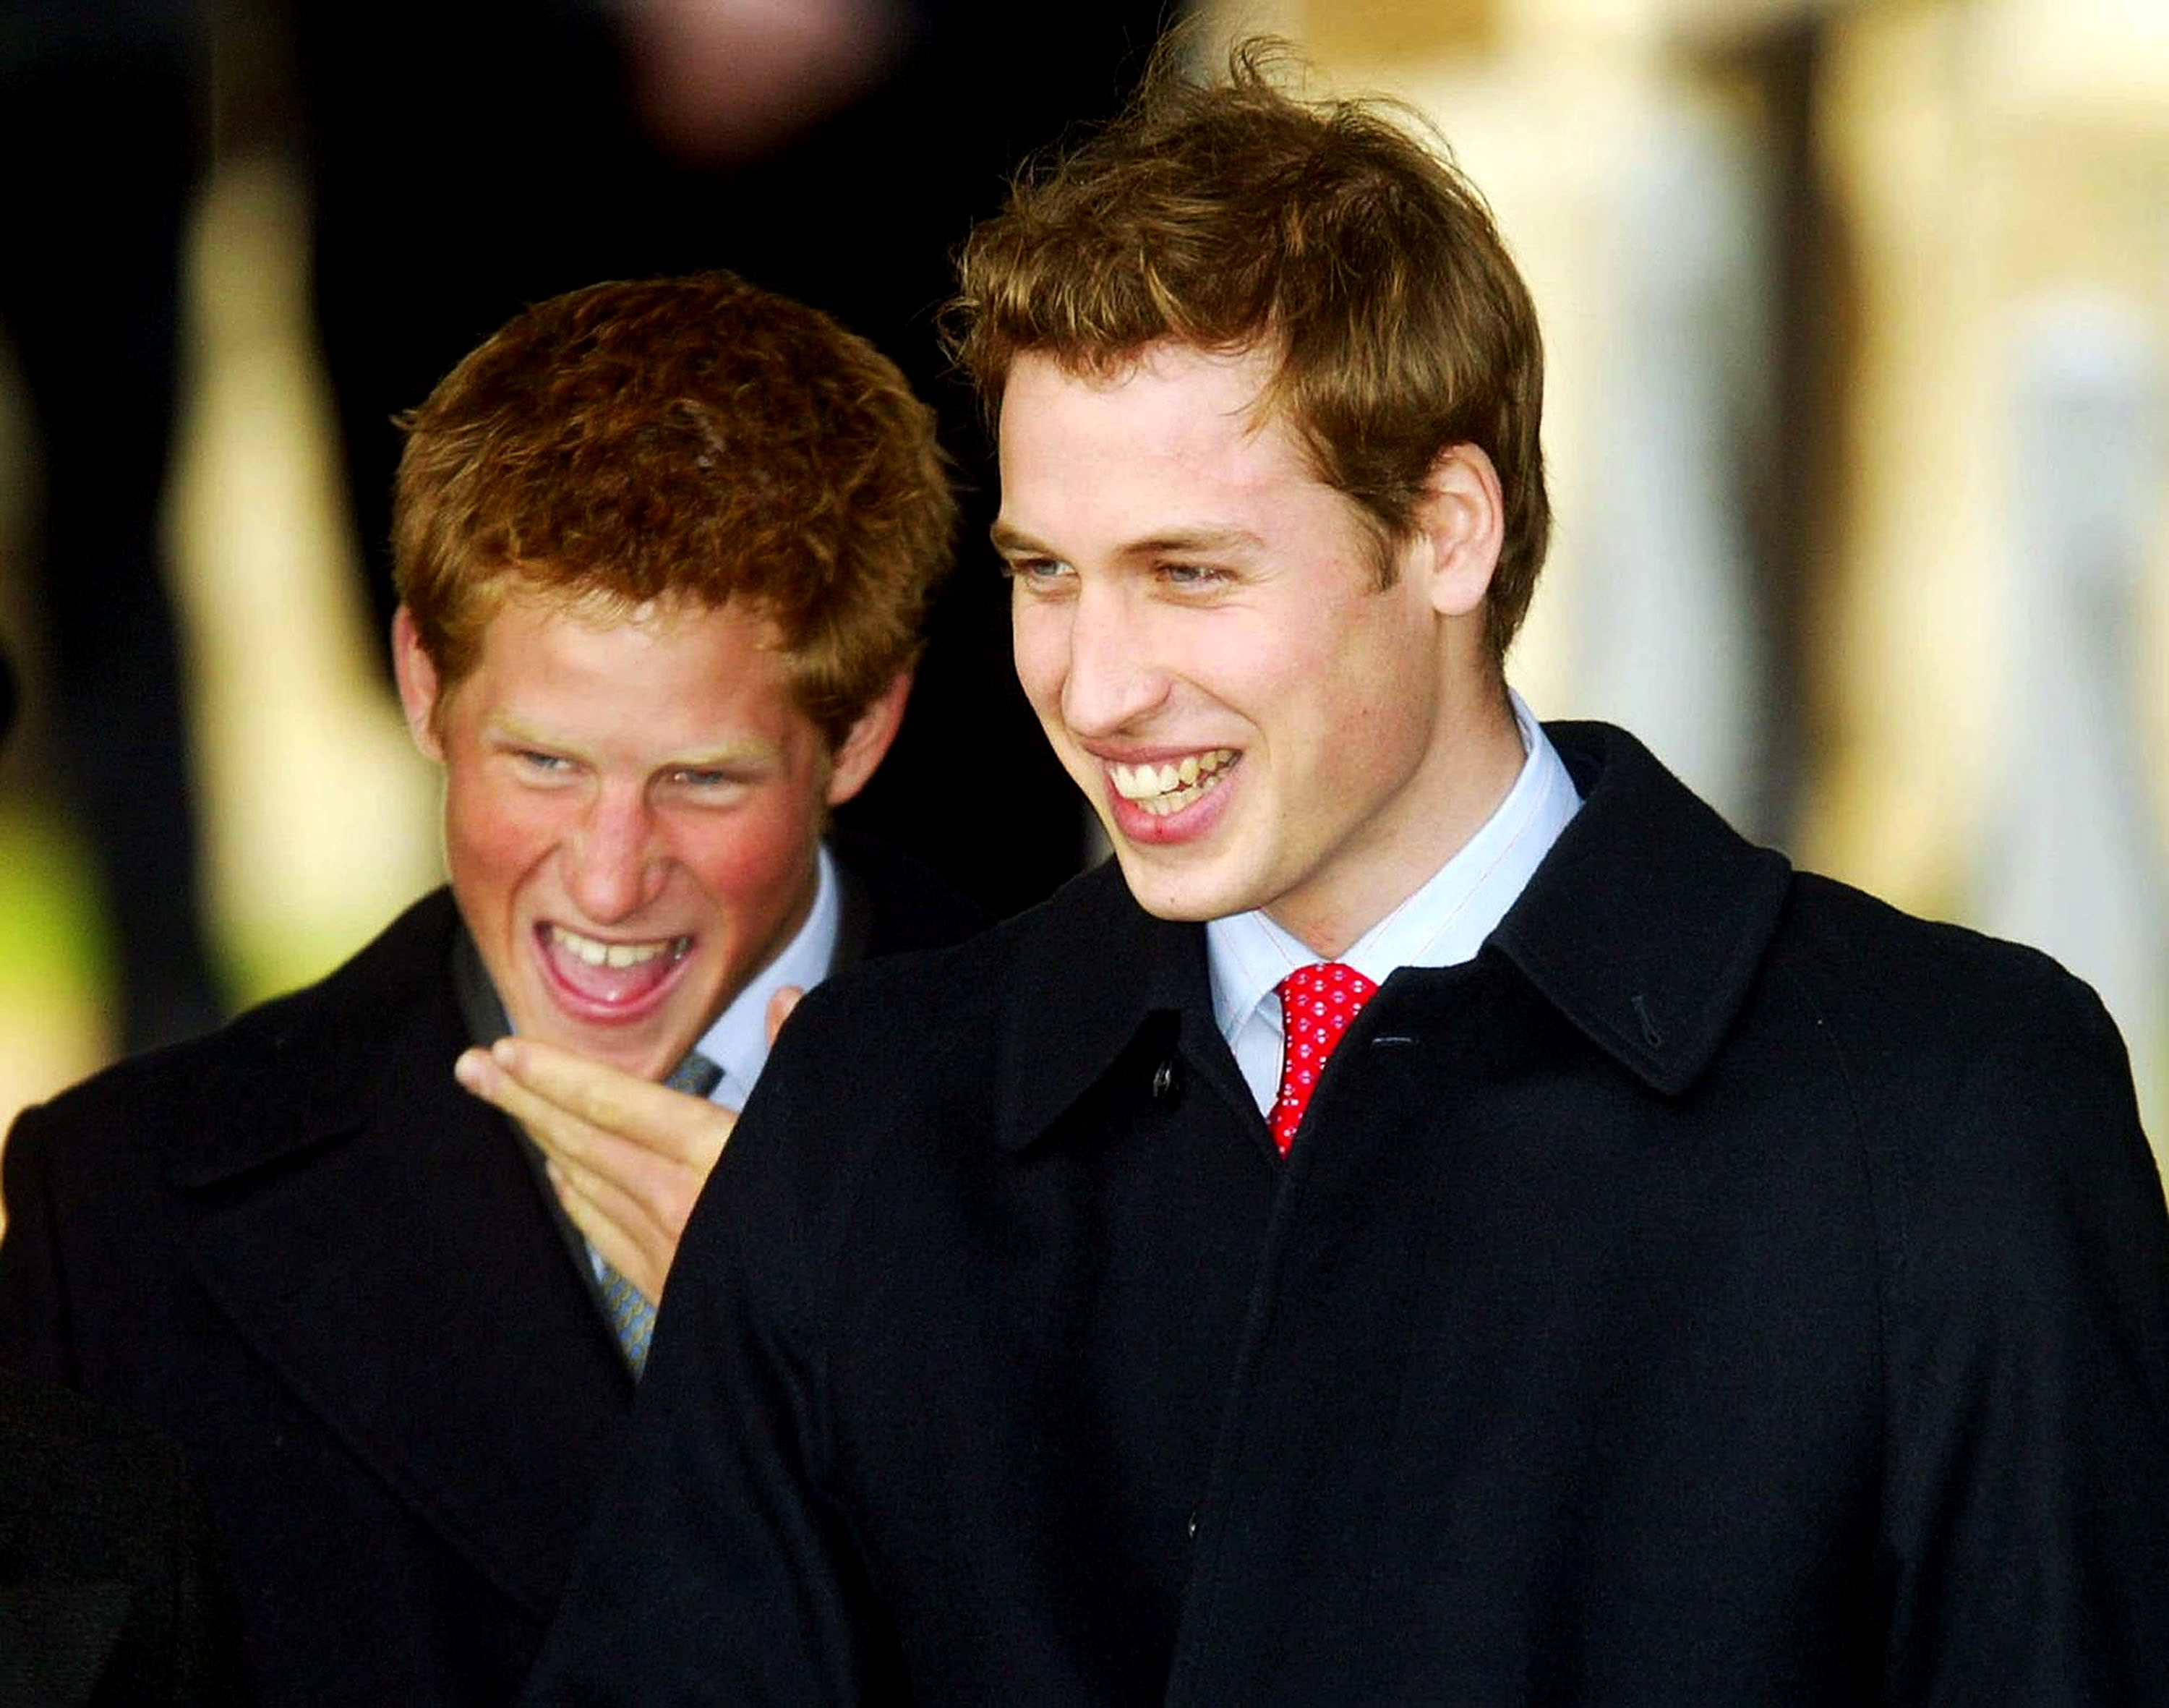 Prince William and Prince Harry's Memorable Moments Together | Time